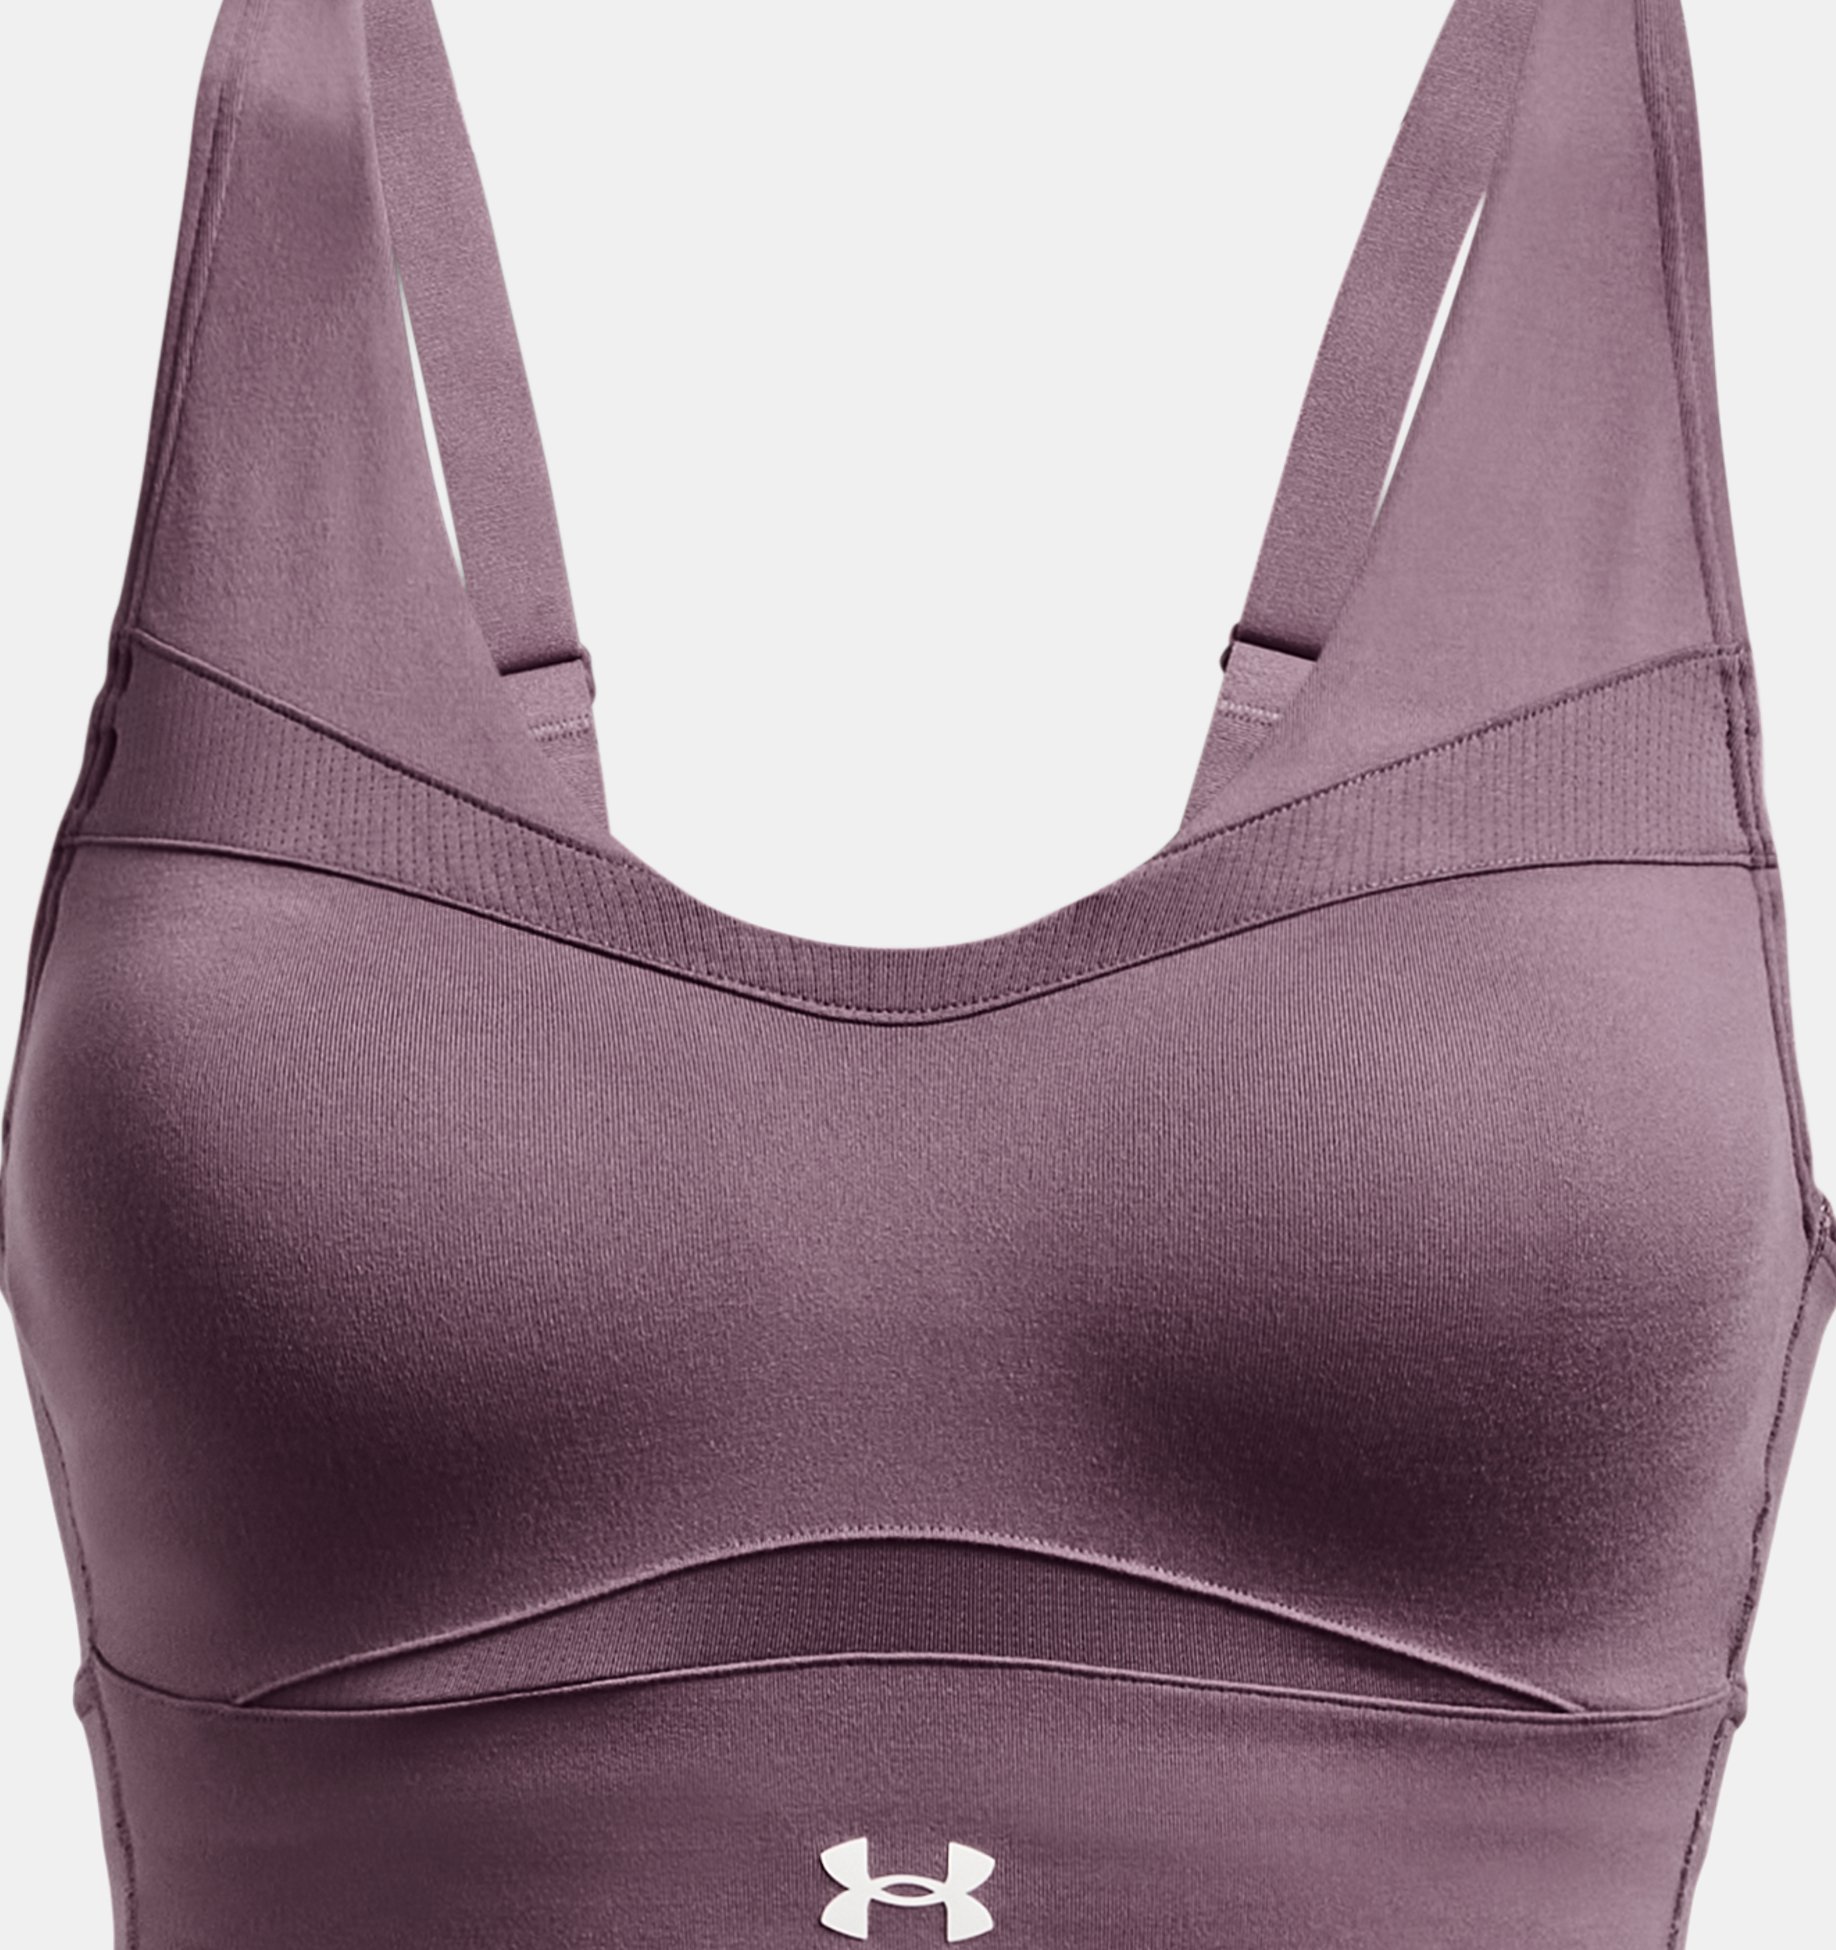 https://underarmour.scene7.com/is/image/Underarmour/PS1381666-500_HF?rp=standard-0pad|pdpZoomDesktop&scl=0.72&fmt=jpg&qlt=85&resMode=sharp2&cache=on,on&bgc=f0f0f0&wid=1836&hei=1950&size=1500,1500